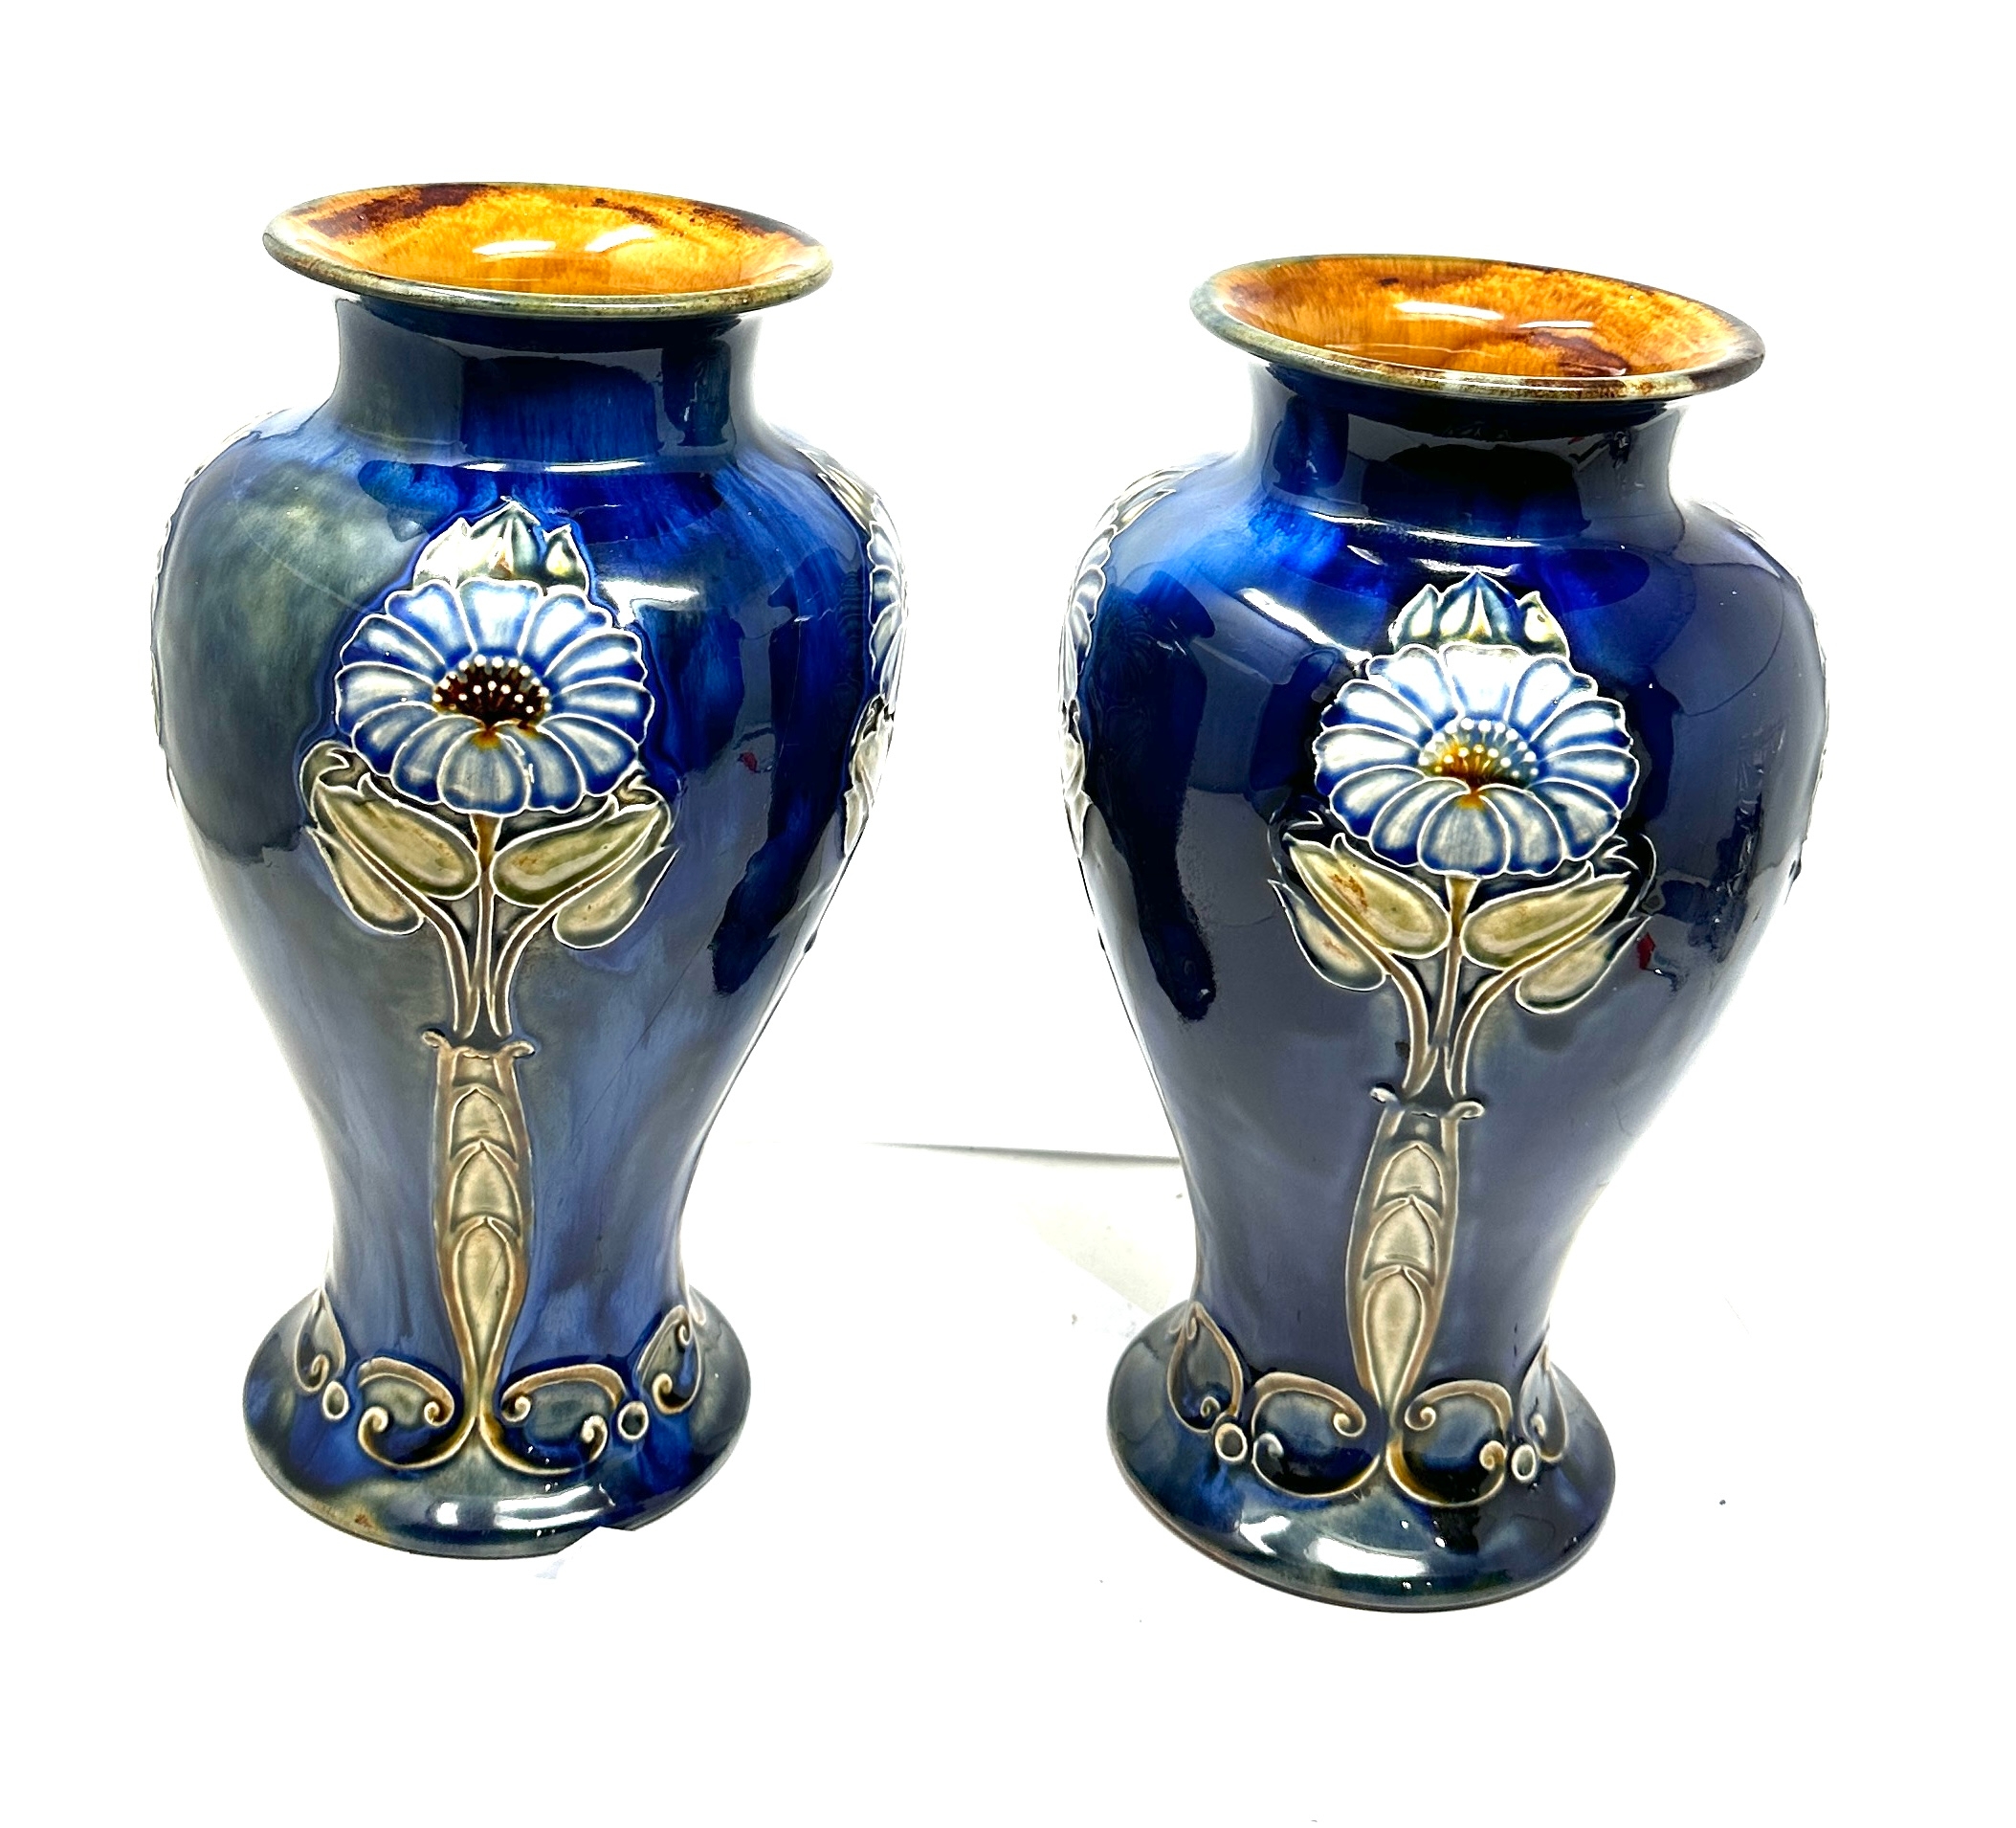 Large antique pair of royal doulton stone ware vases measure approx height 26cm in good condition